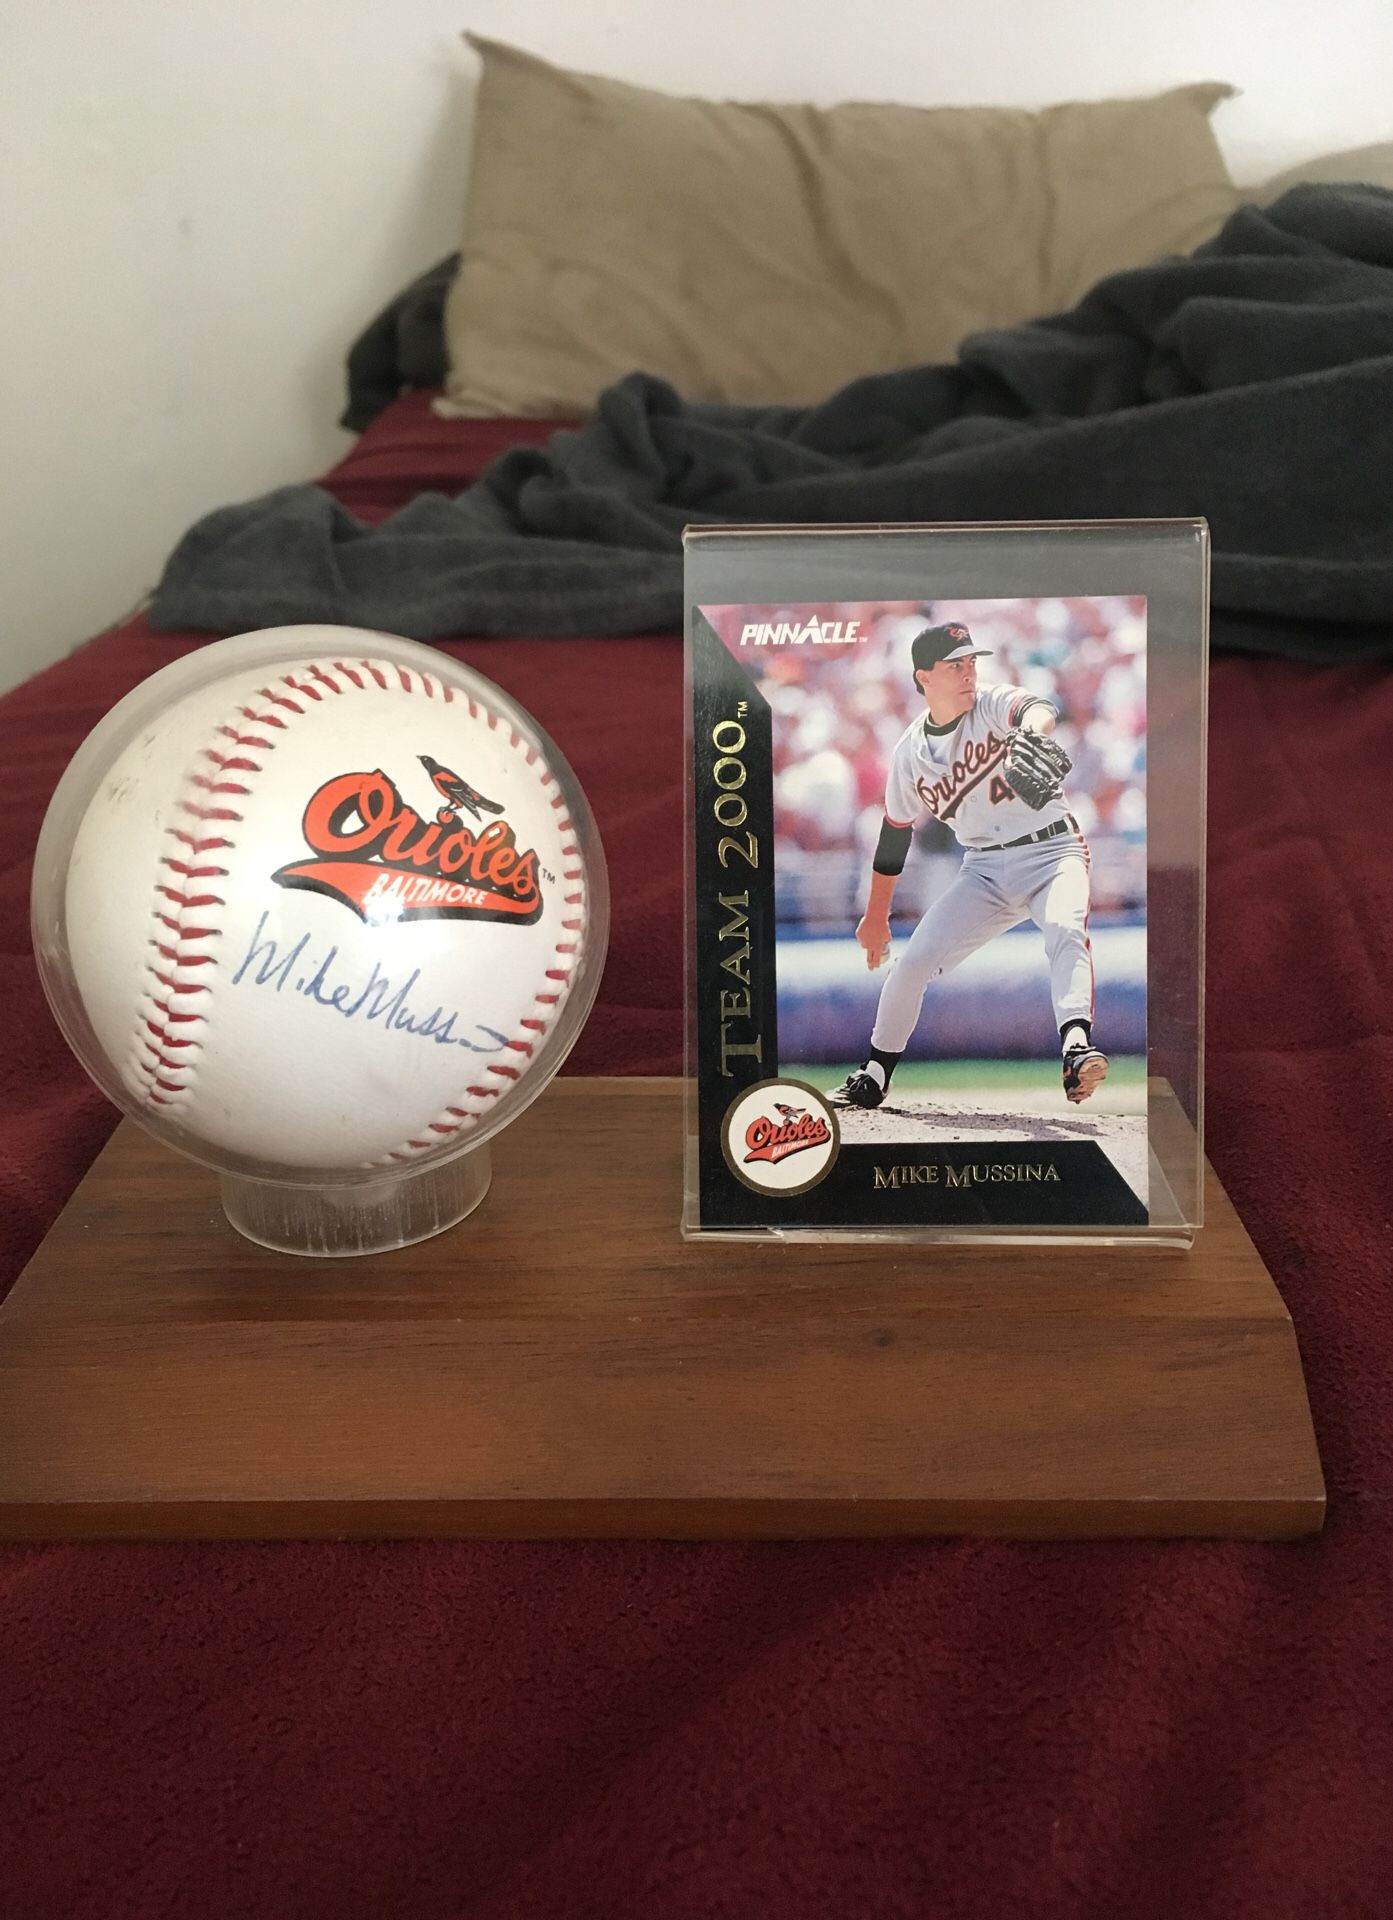 Autograph orioles baseball do not have a coa And price is negotiable